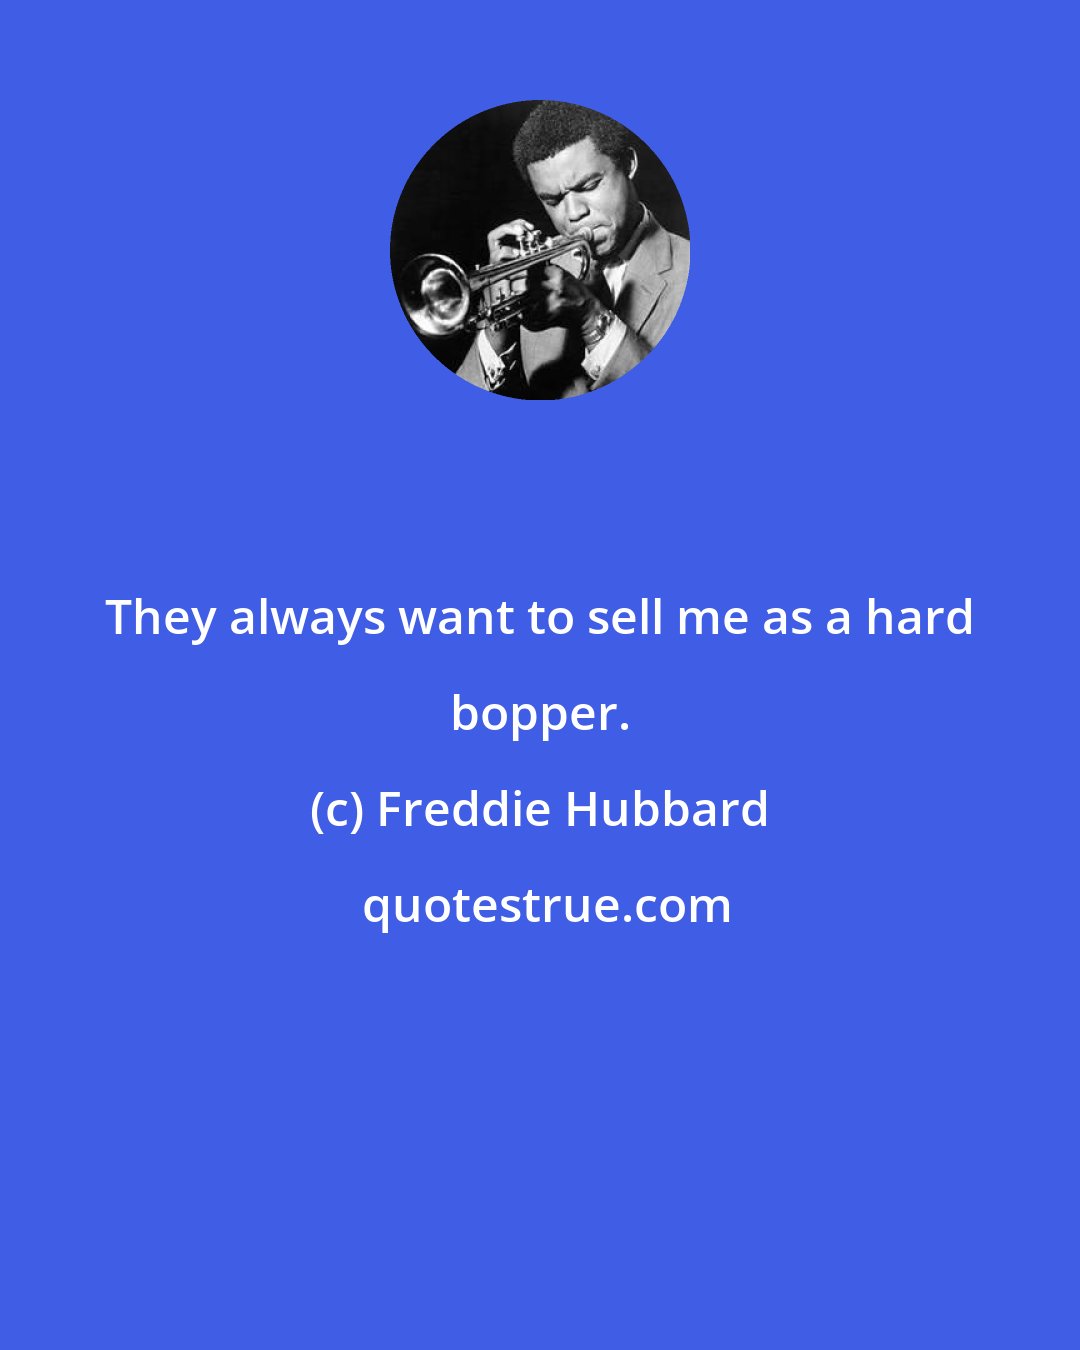 Freddie Hubbard: They always want to sell me as a hard bopper.